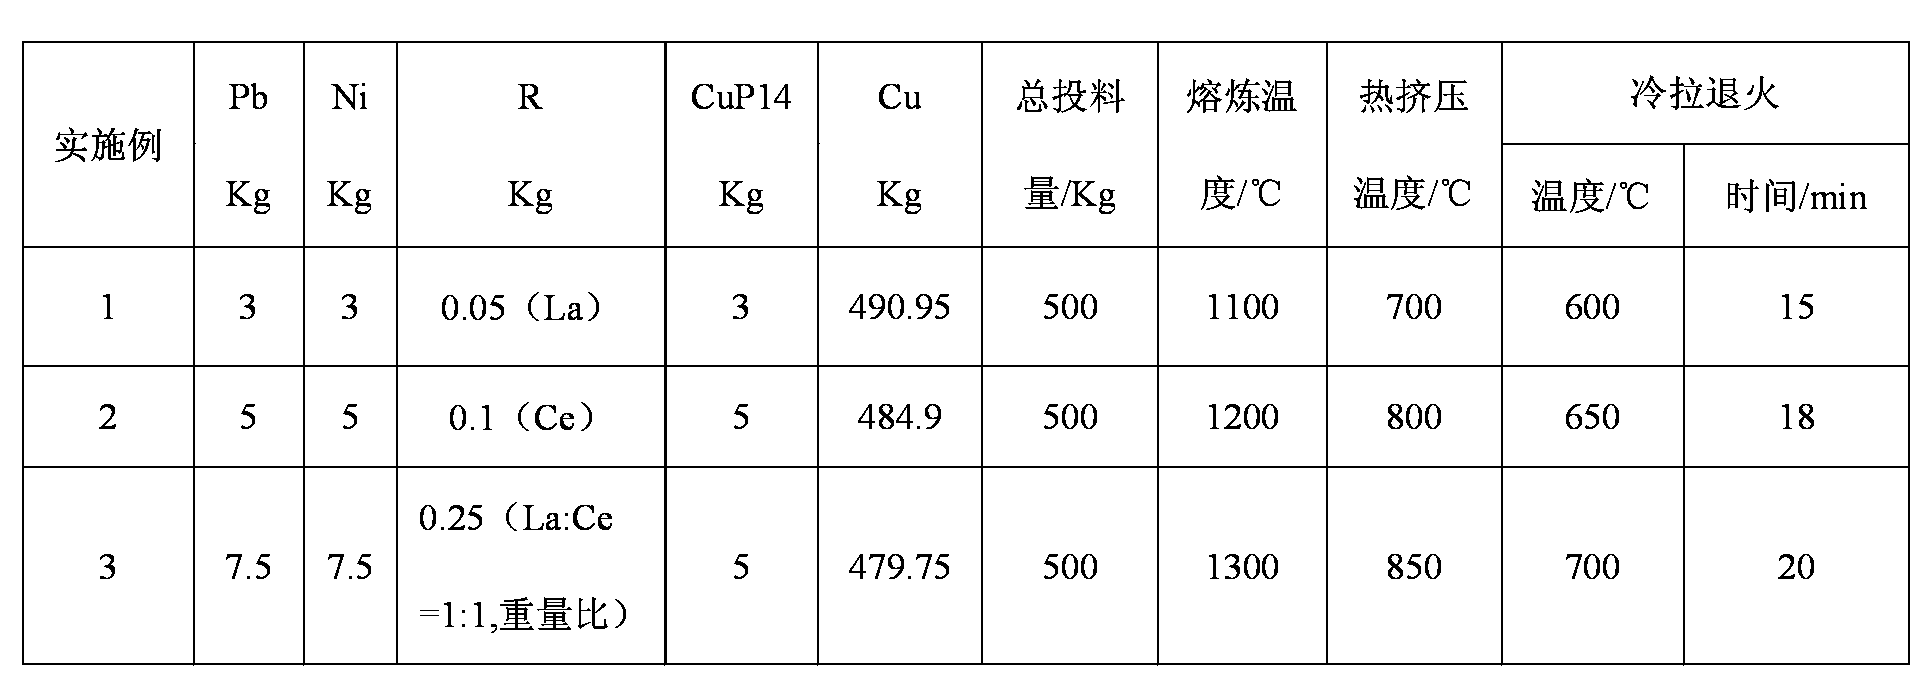 High-strength high-conductivity free-cutting copper alloy material and preparation method thereof